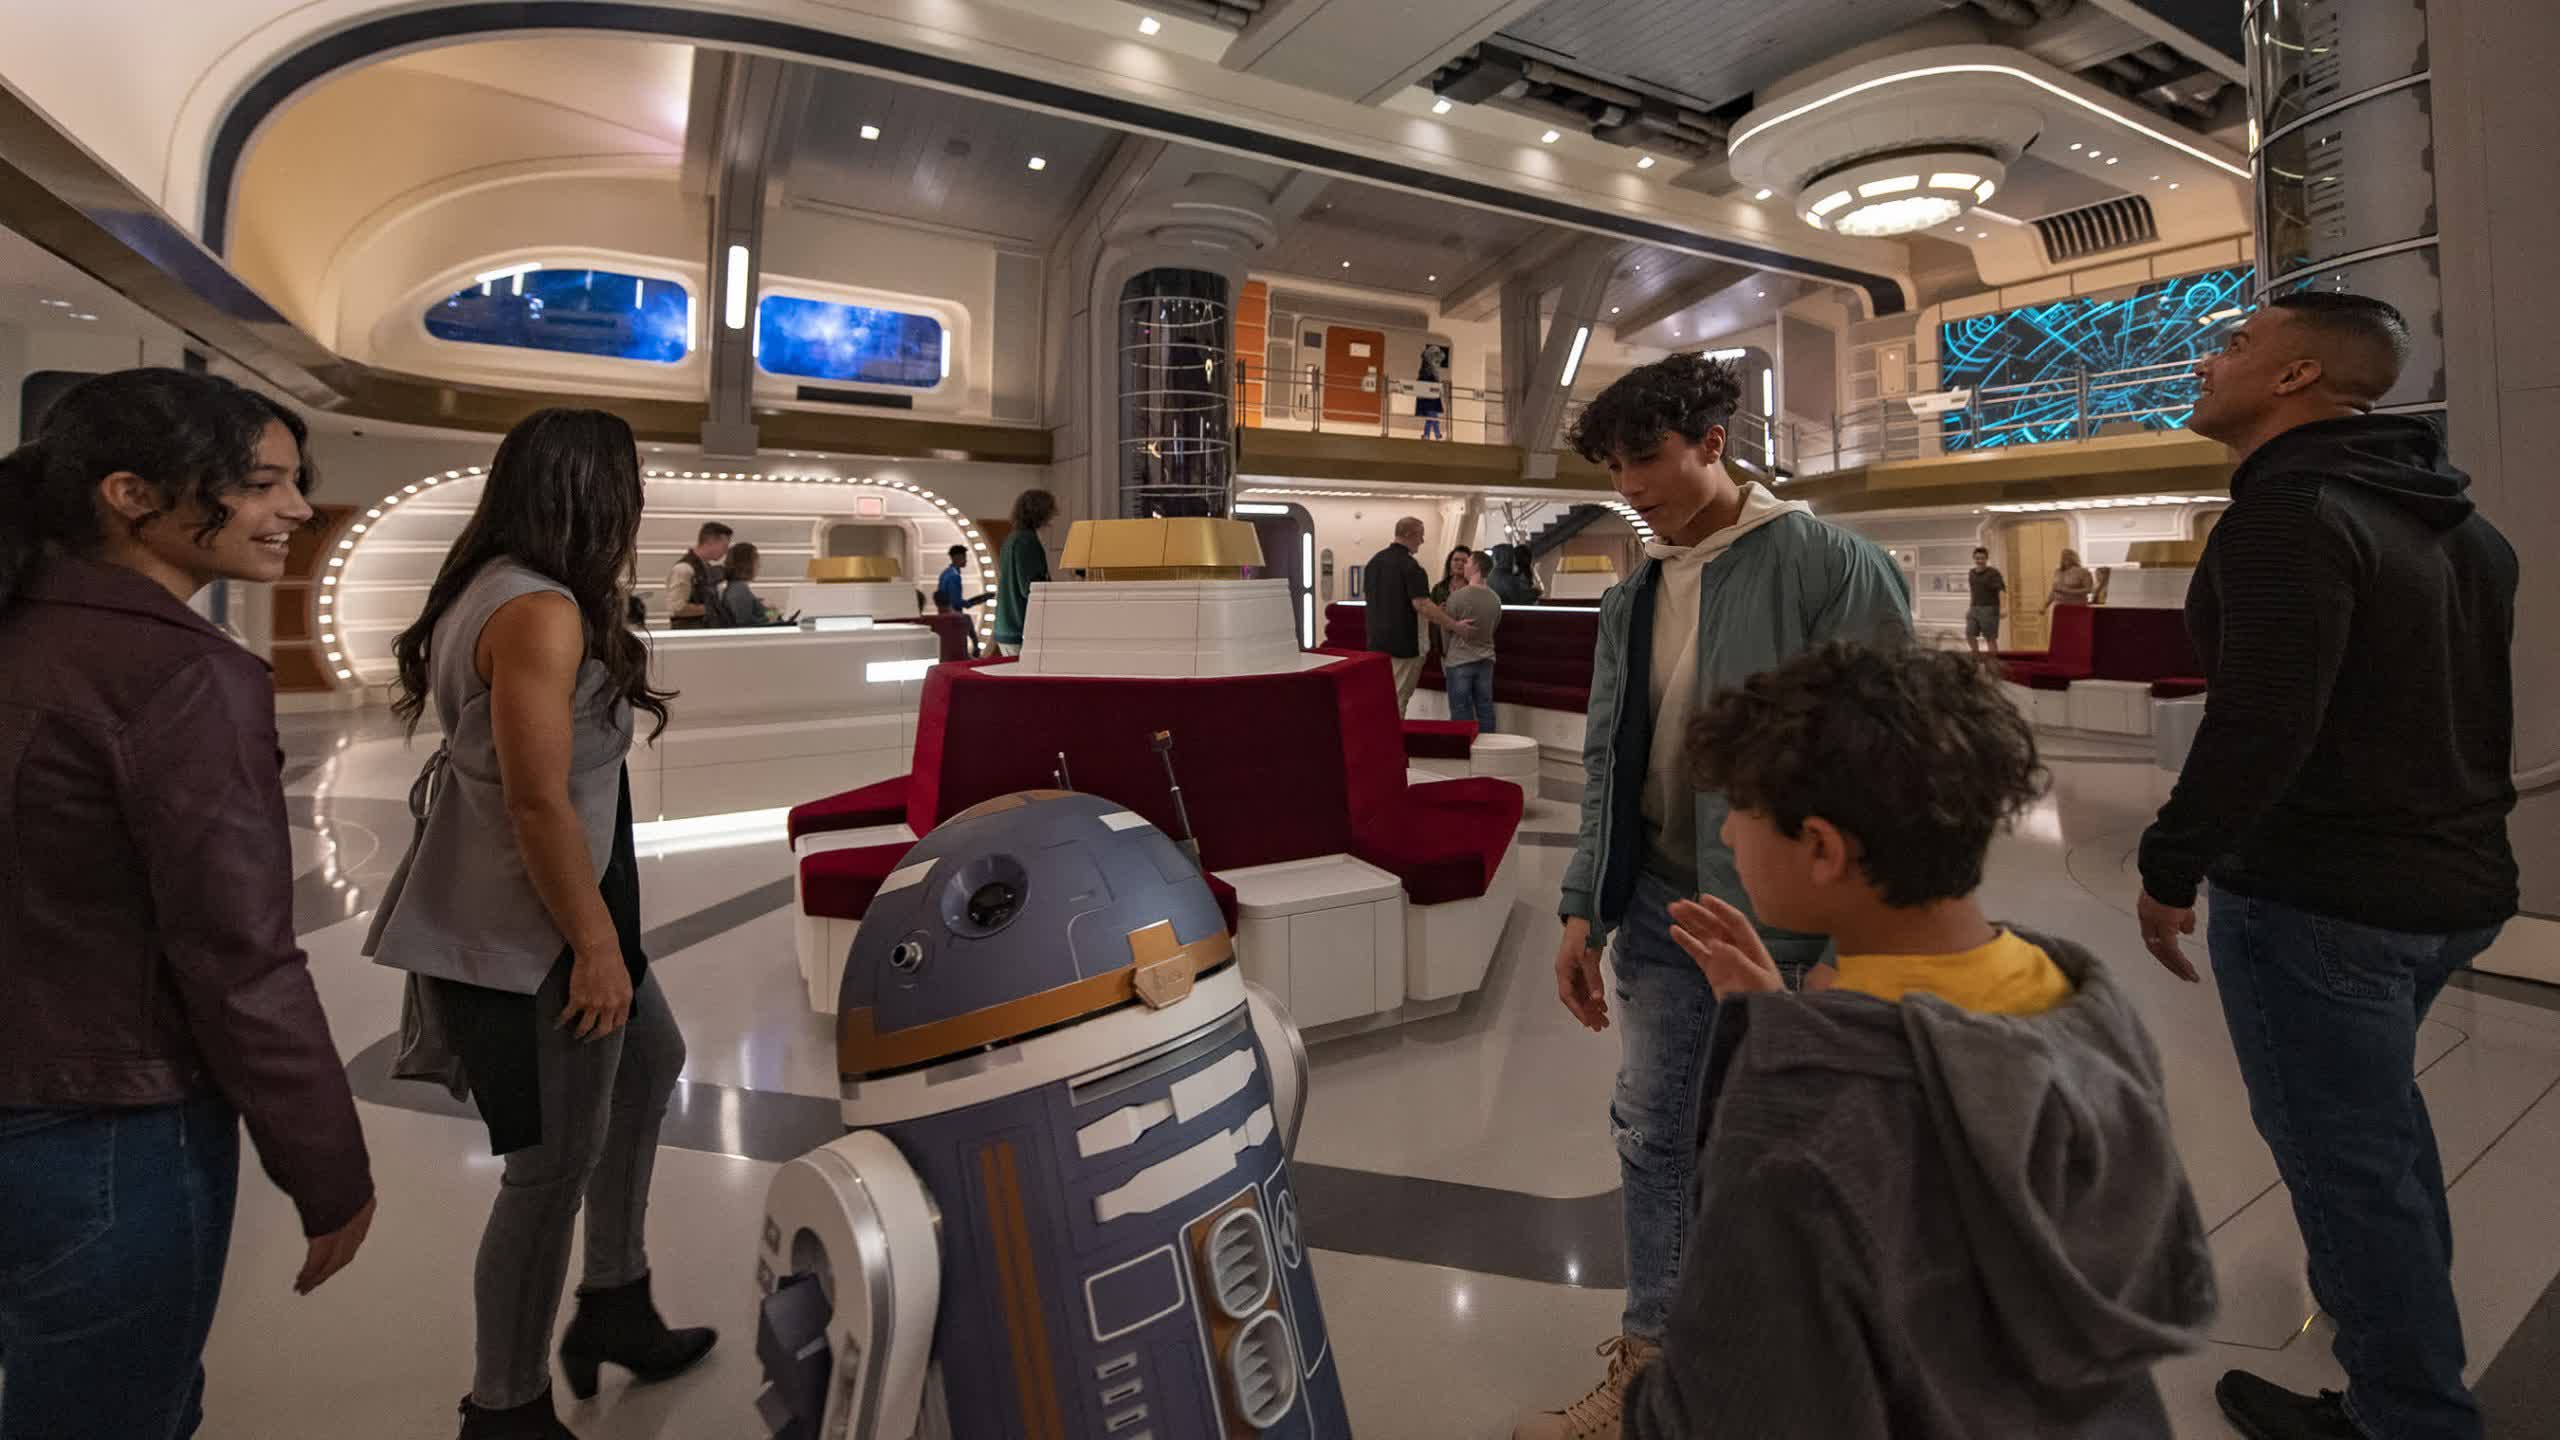 Disney will shut down its $2,400 per person Star Wars: Galactic Starcruiser resort after only 18 months